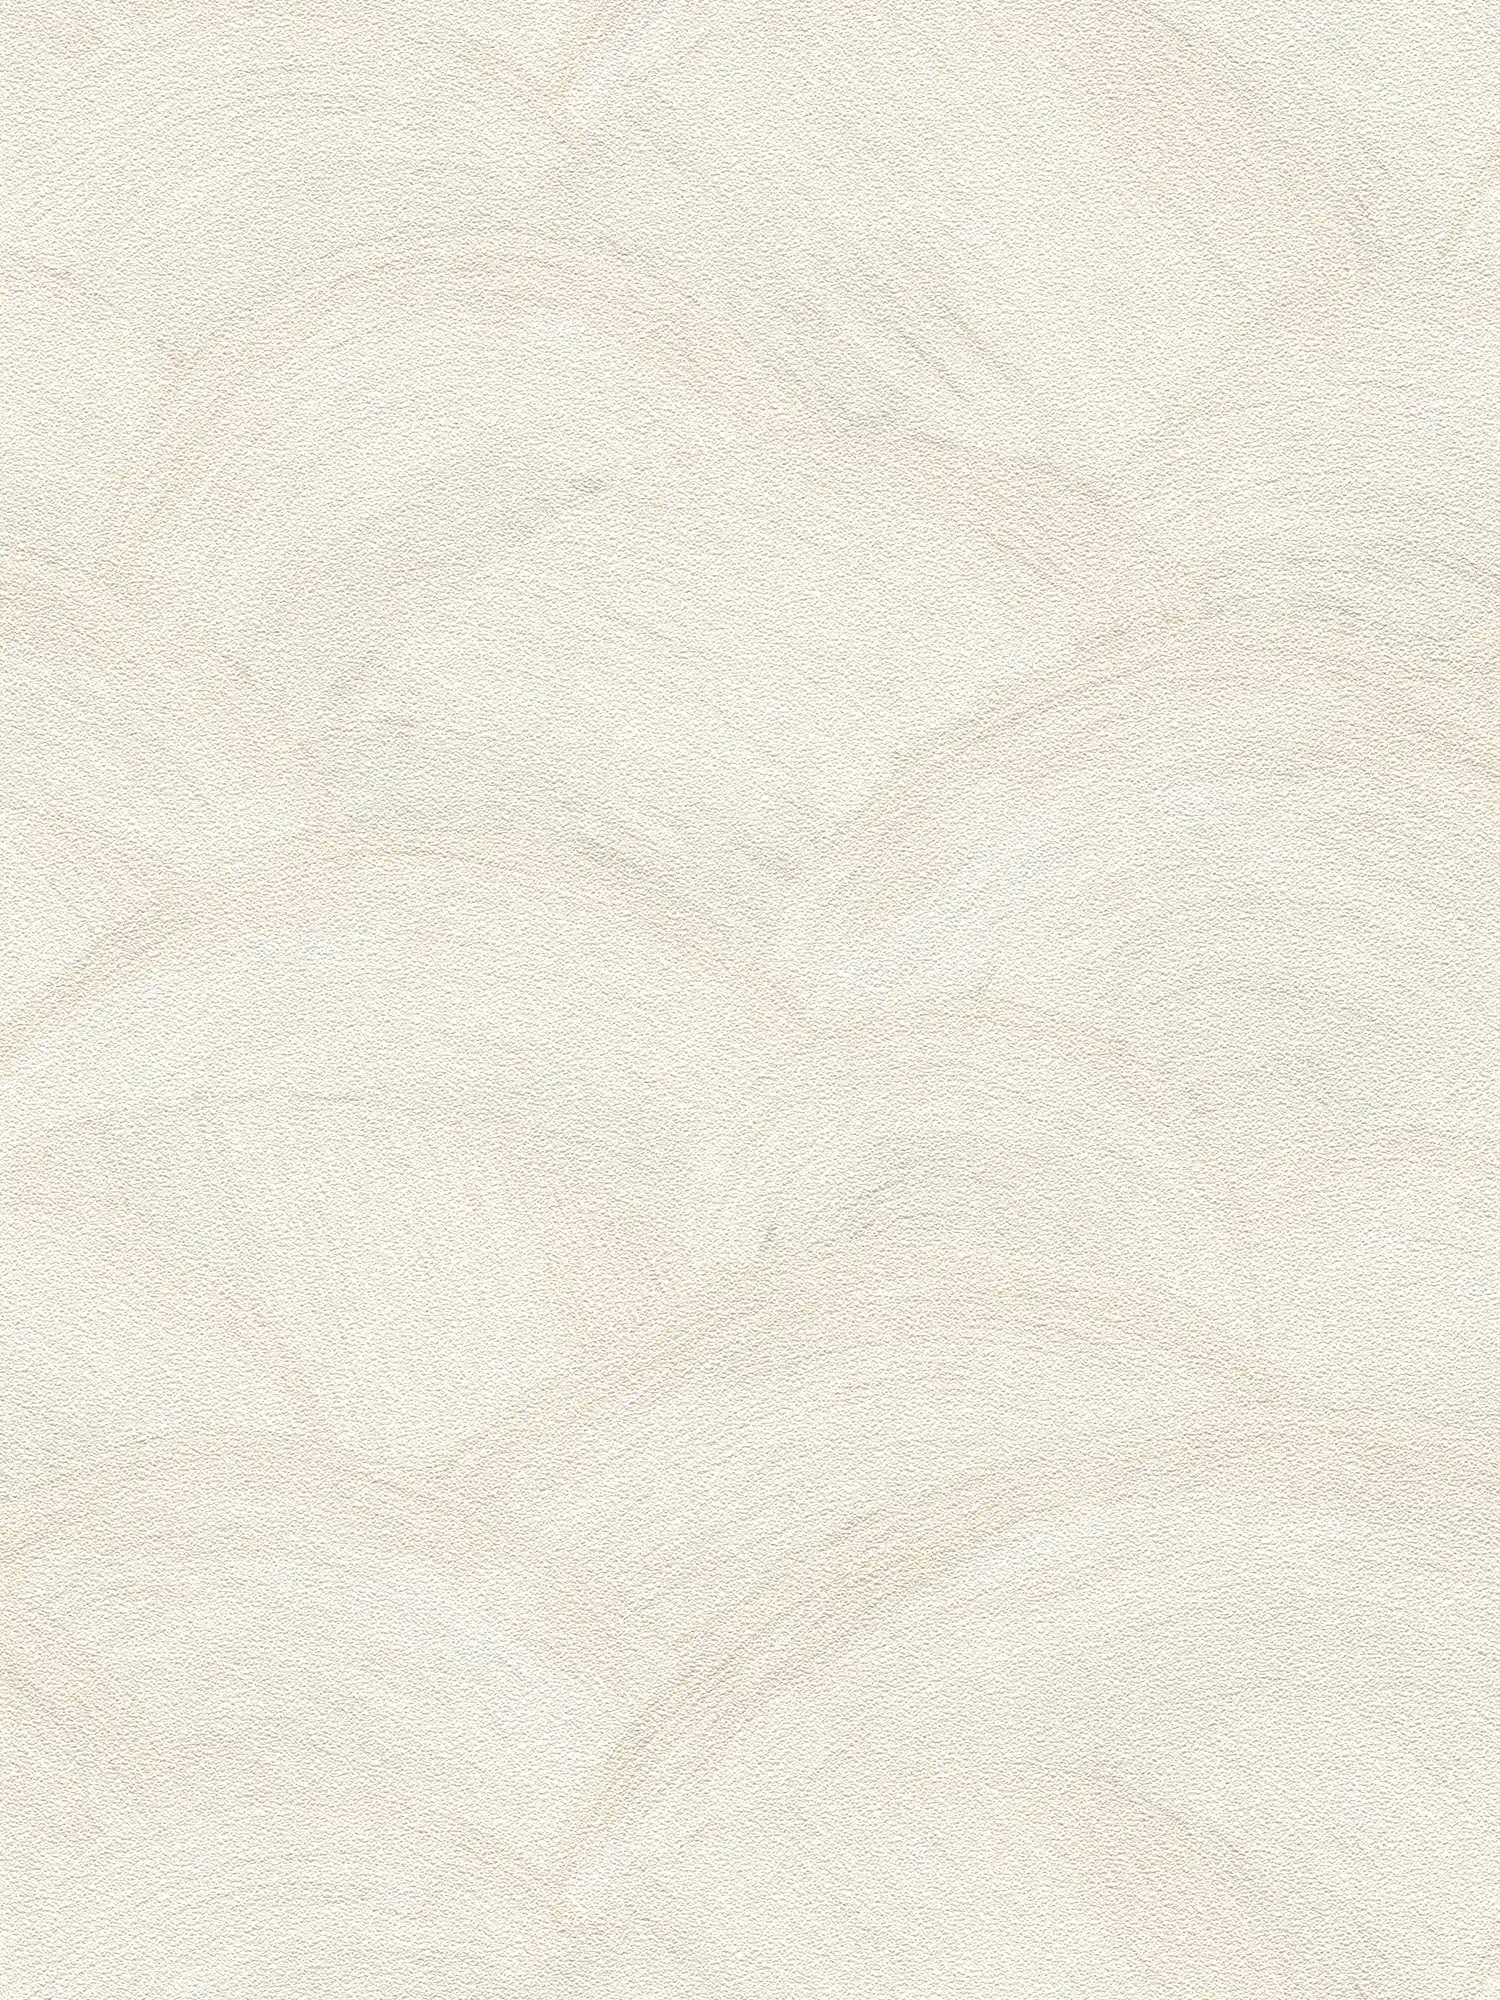 Non-woven wallpaper with subtle wave pattern - white, cream, grey
